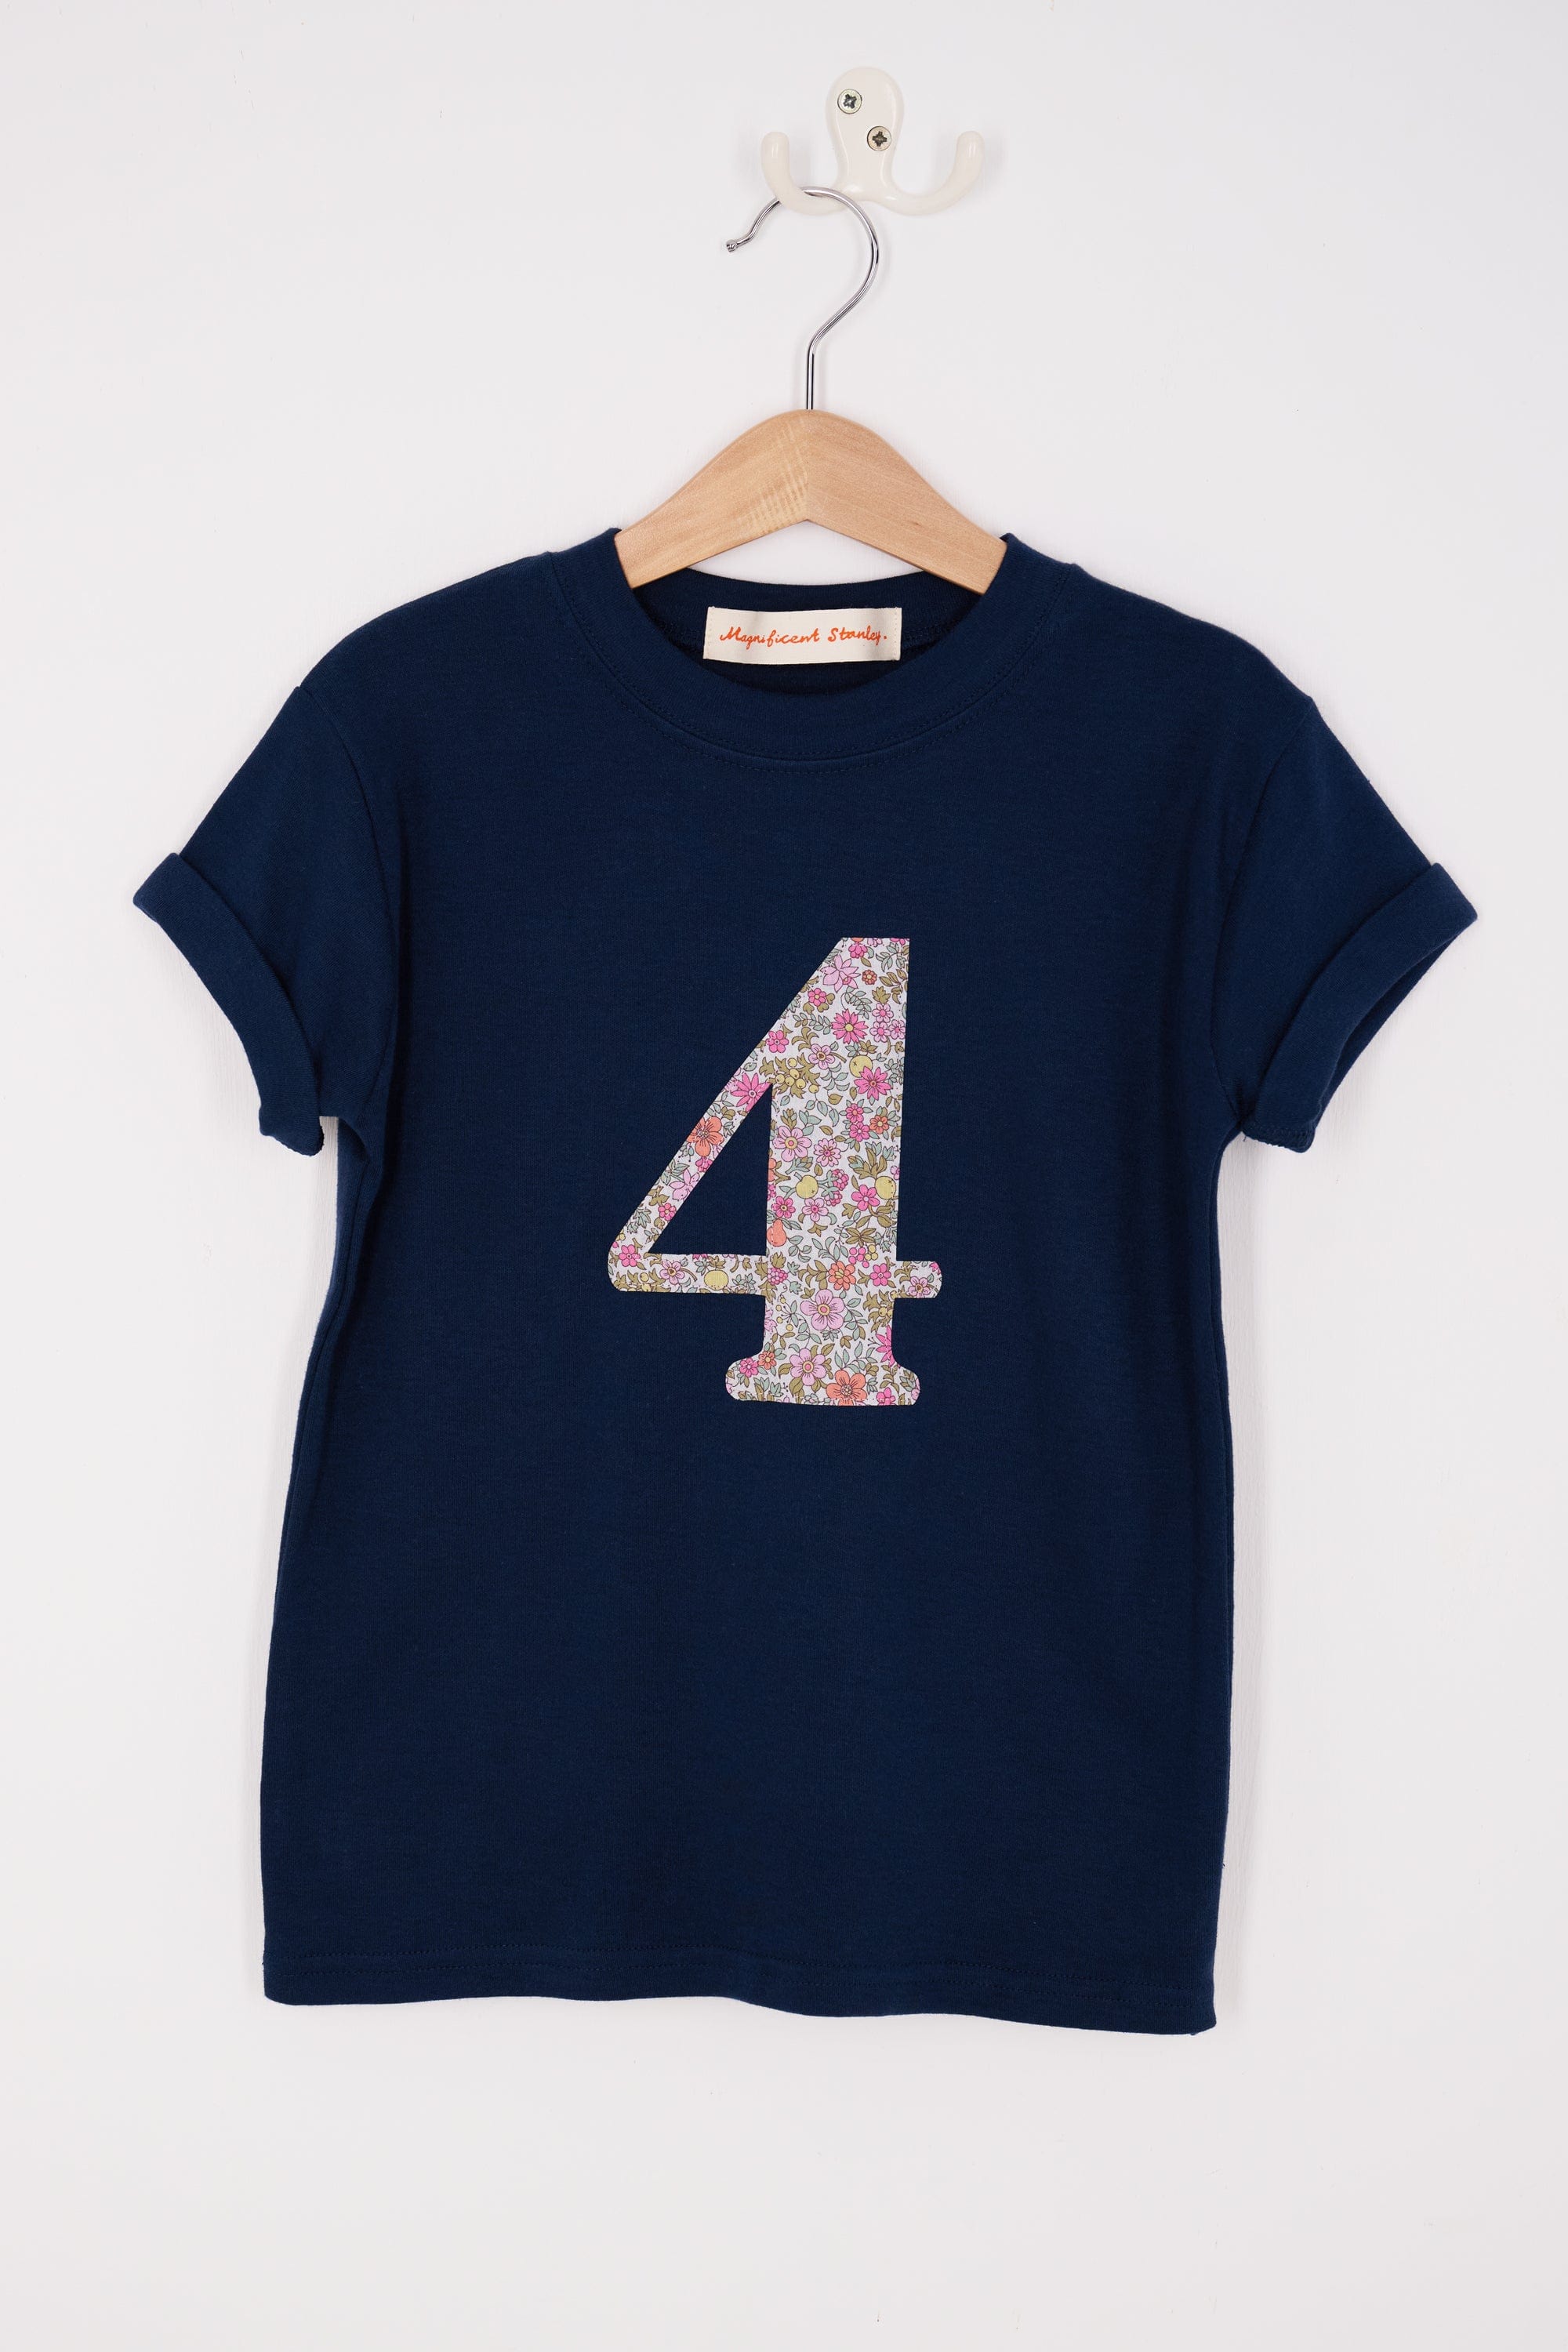 Magnificent Stanley Tee Create Your Own Personalised or Number Liberty Print Navy T-Shirt